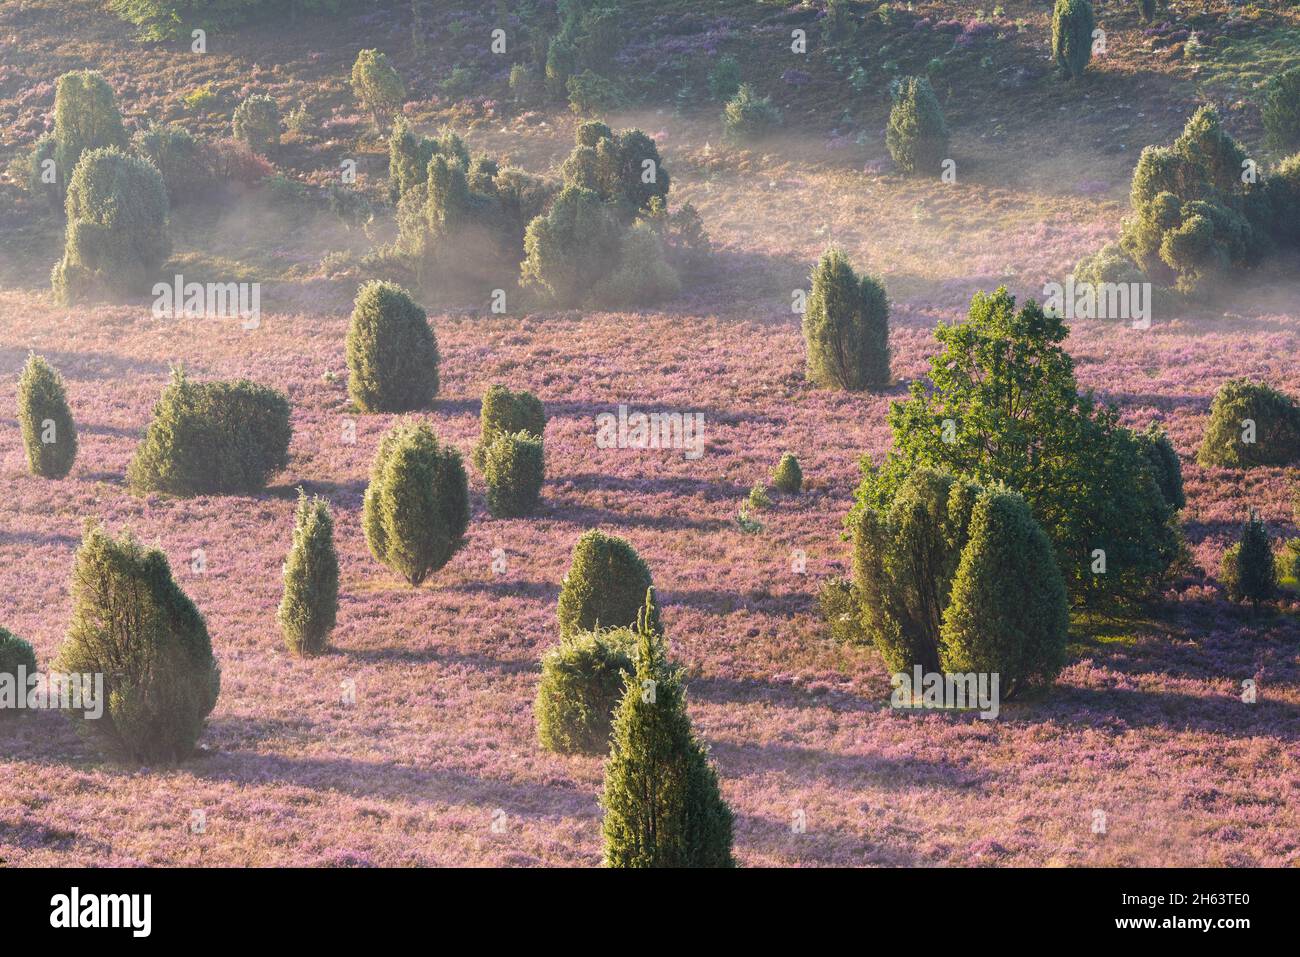 flowering common heather (calluna vulgaris) covers the ground in the totengrund,in between there are juniper bushes,the ground fog evaporates in the sun,morning light,nature reserve near wilsede near bispingen,lüneburg heath nature park,germany,lower saxony Stock Photo